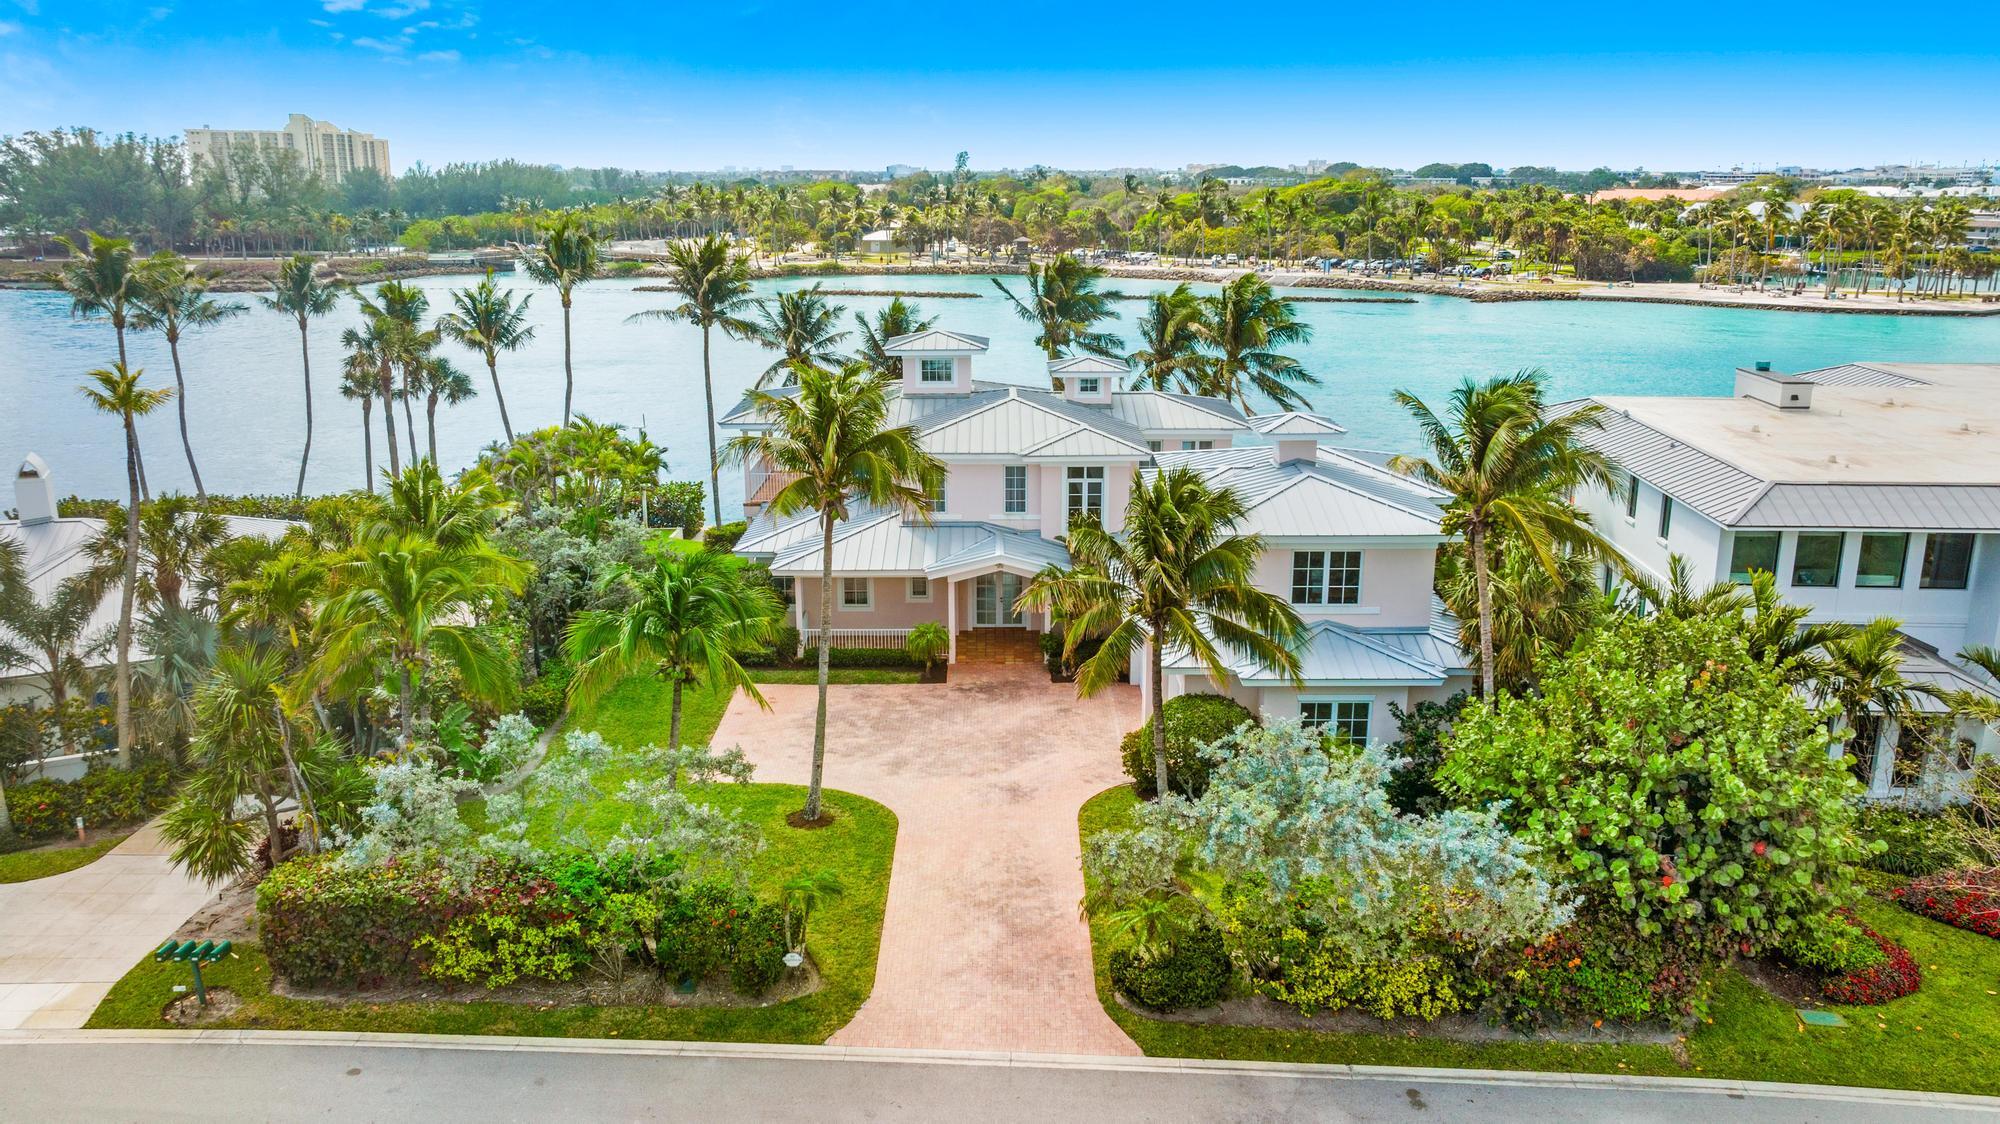 81 Lighthouse Drive, Jupiter Inlet Colony, Palm Beach County, Florida - 4 Bedrooms  
4 Bathrooms - 